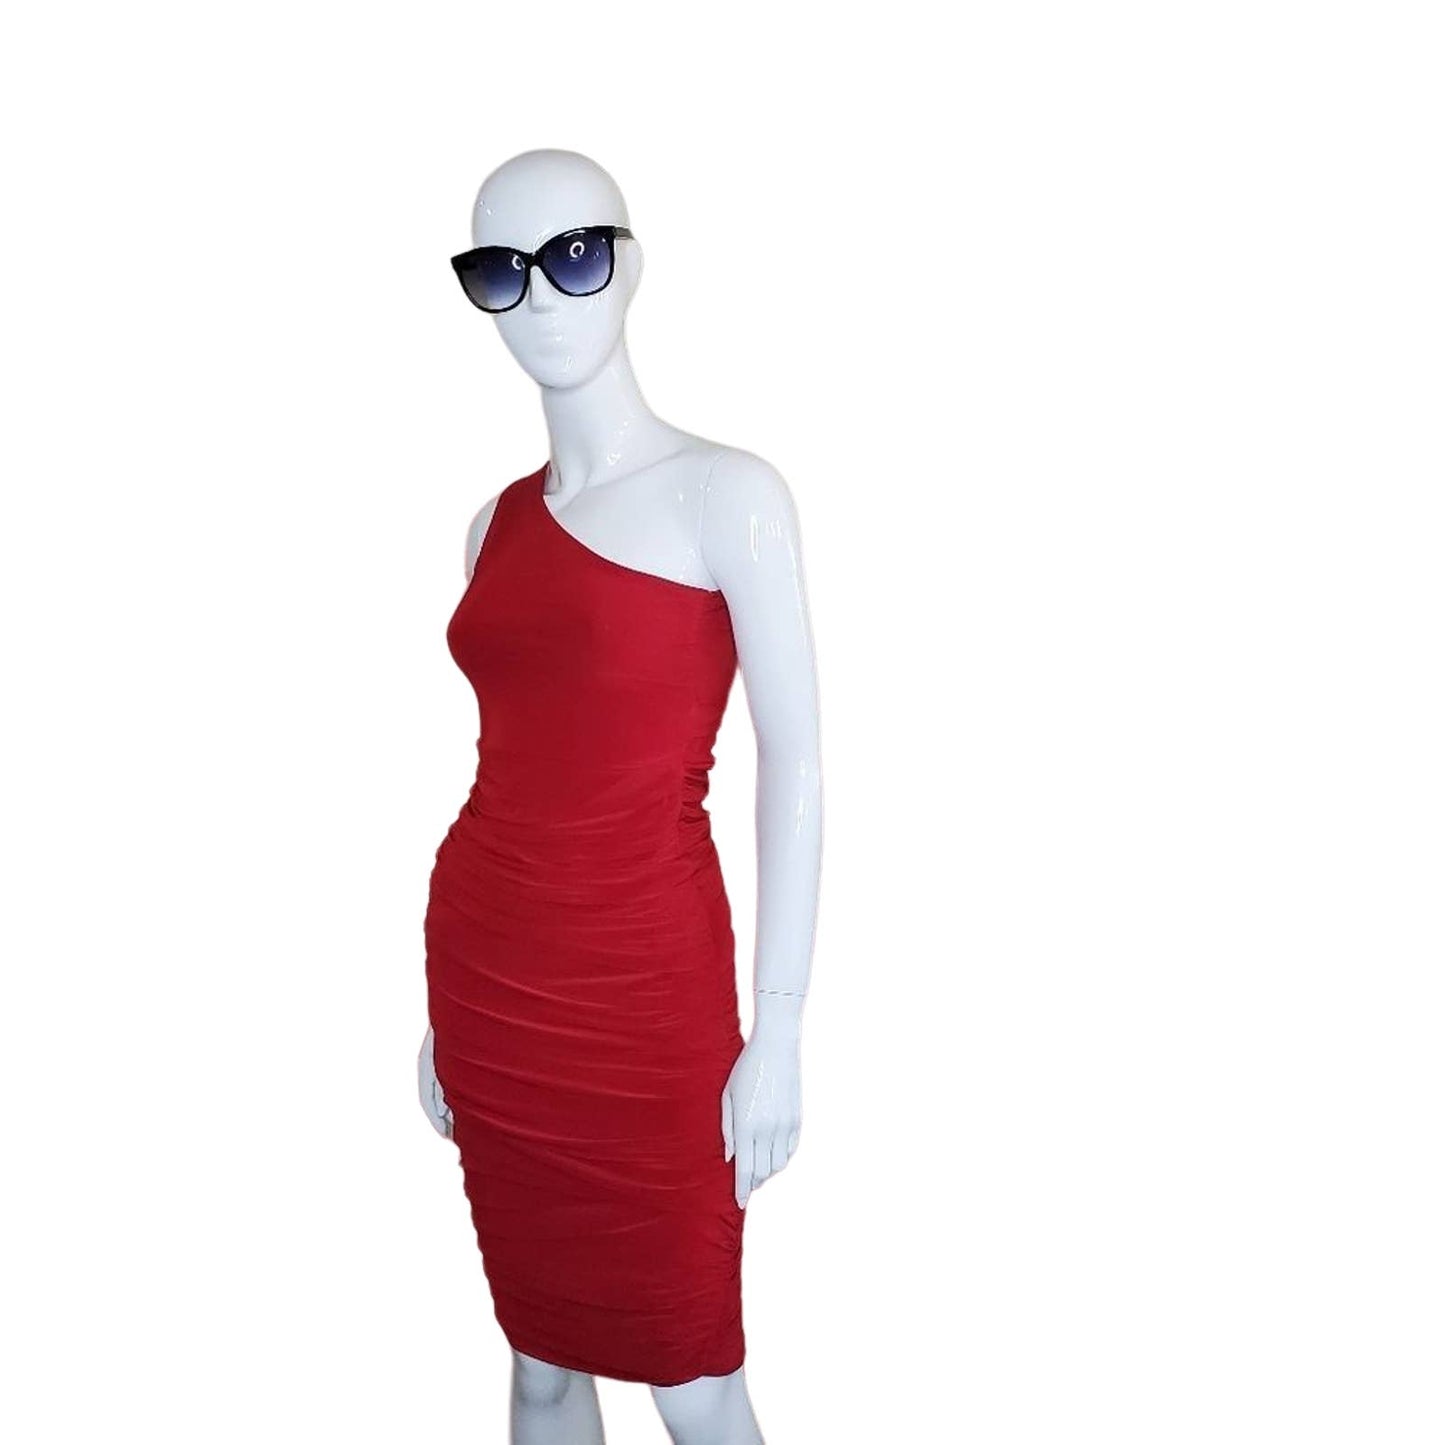 Femme Luxe One Shoulder Sleeveless Bodycon Red Dress, Size UK6/US 0